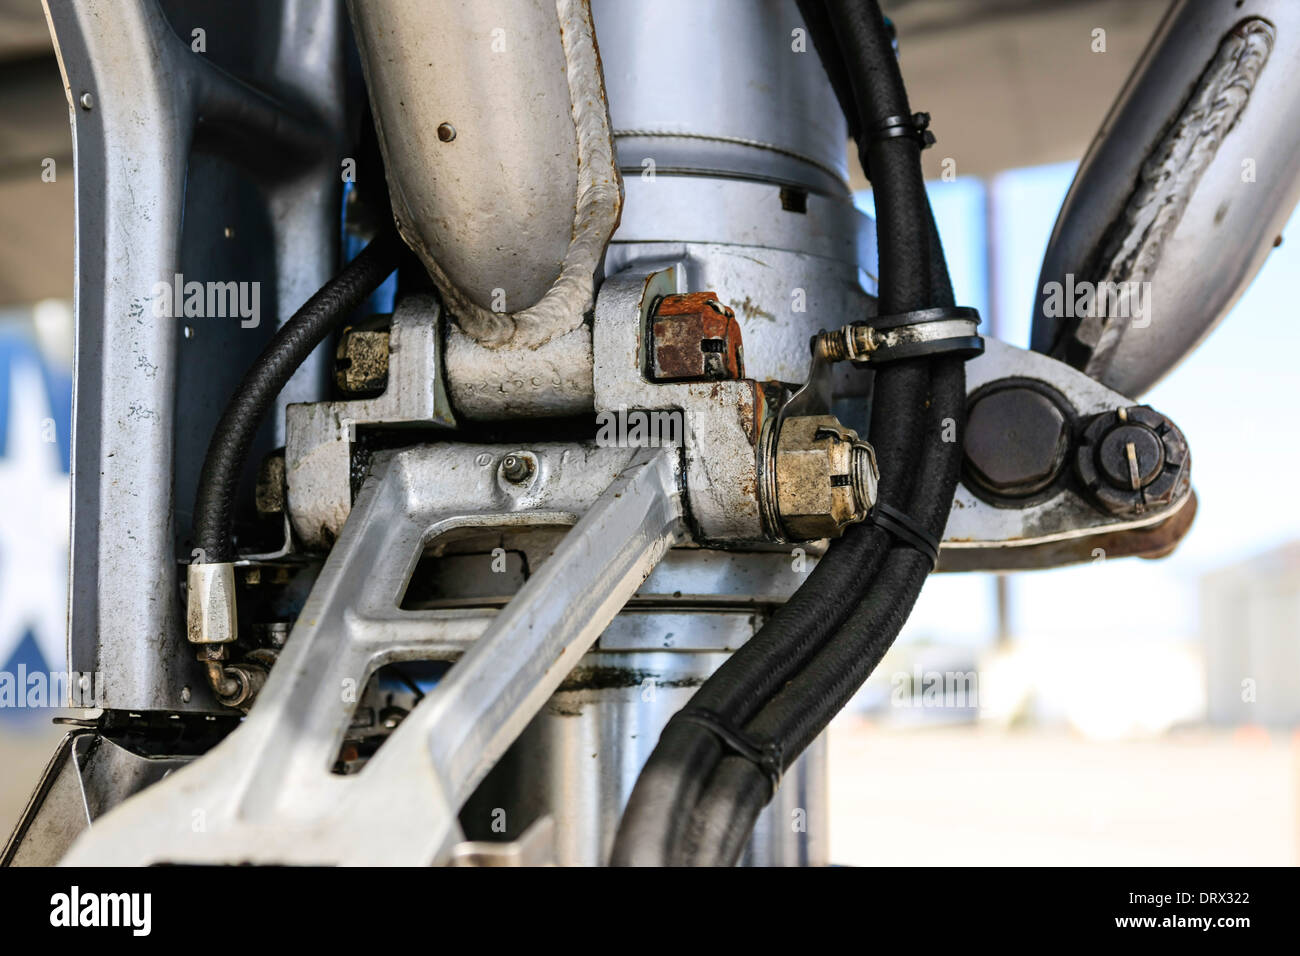 The Main undercarriage strut showing the hydrolics and joints of a B24 Liberator WW2 bomber plane Stock Photo